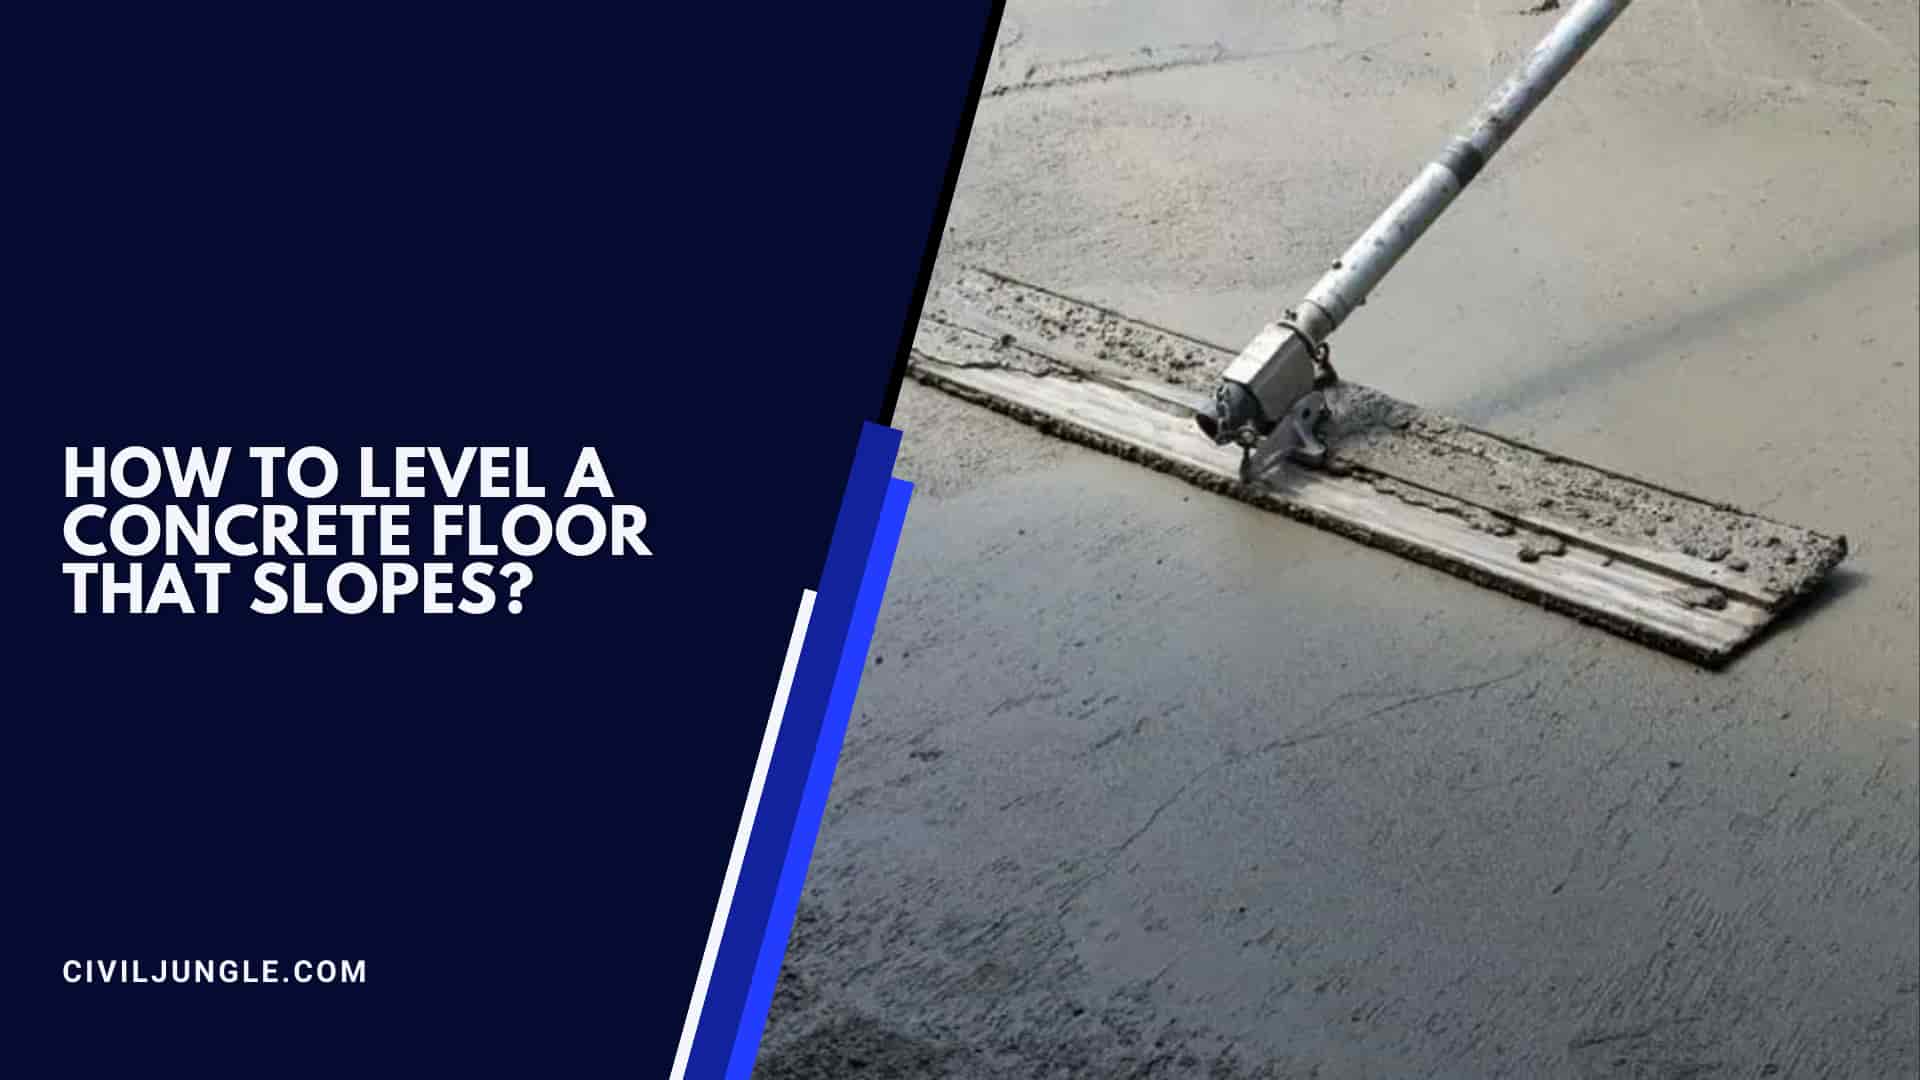 How to Level a Concrete Floor That Slopes?